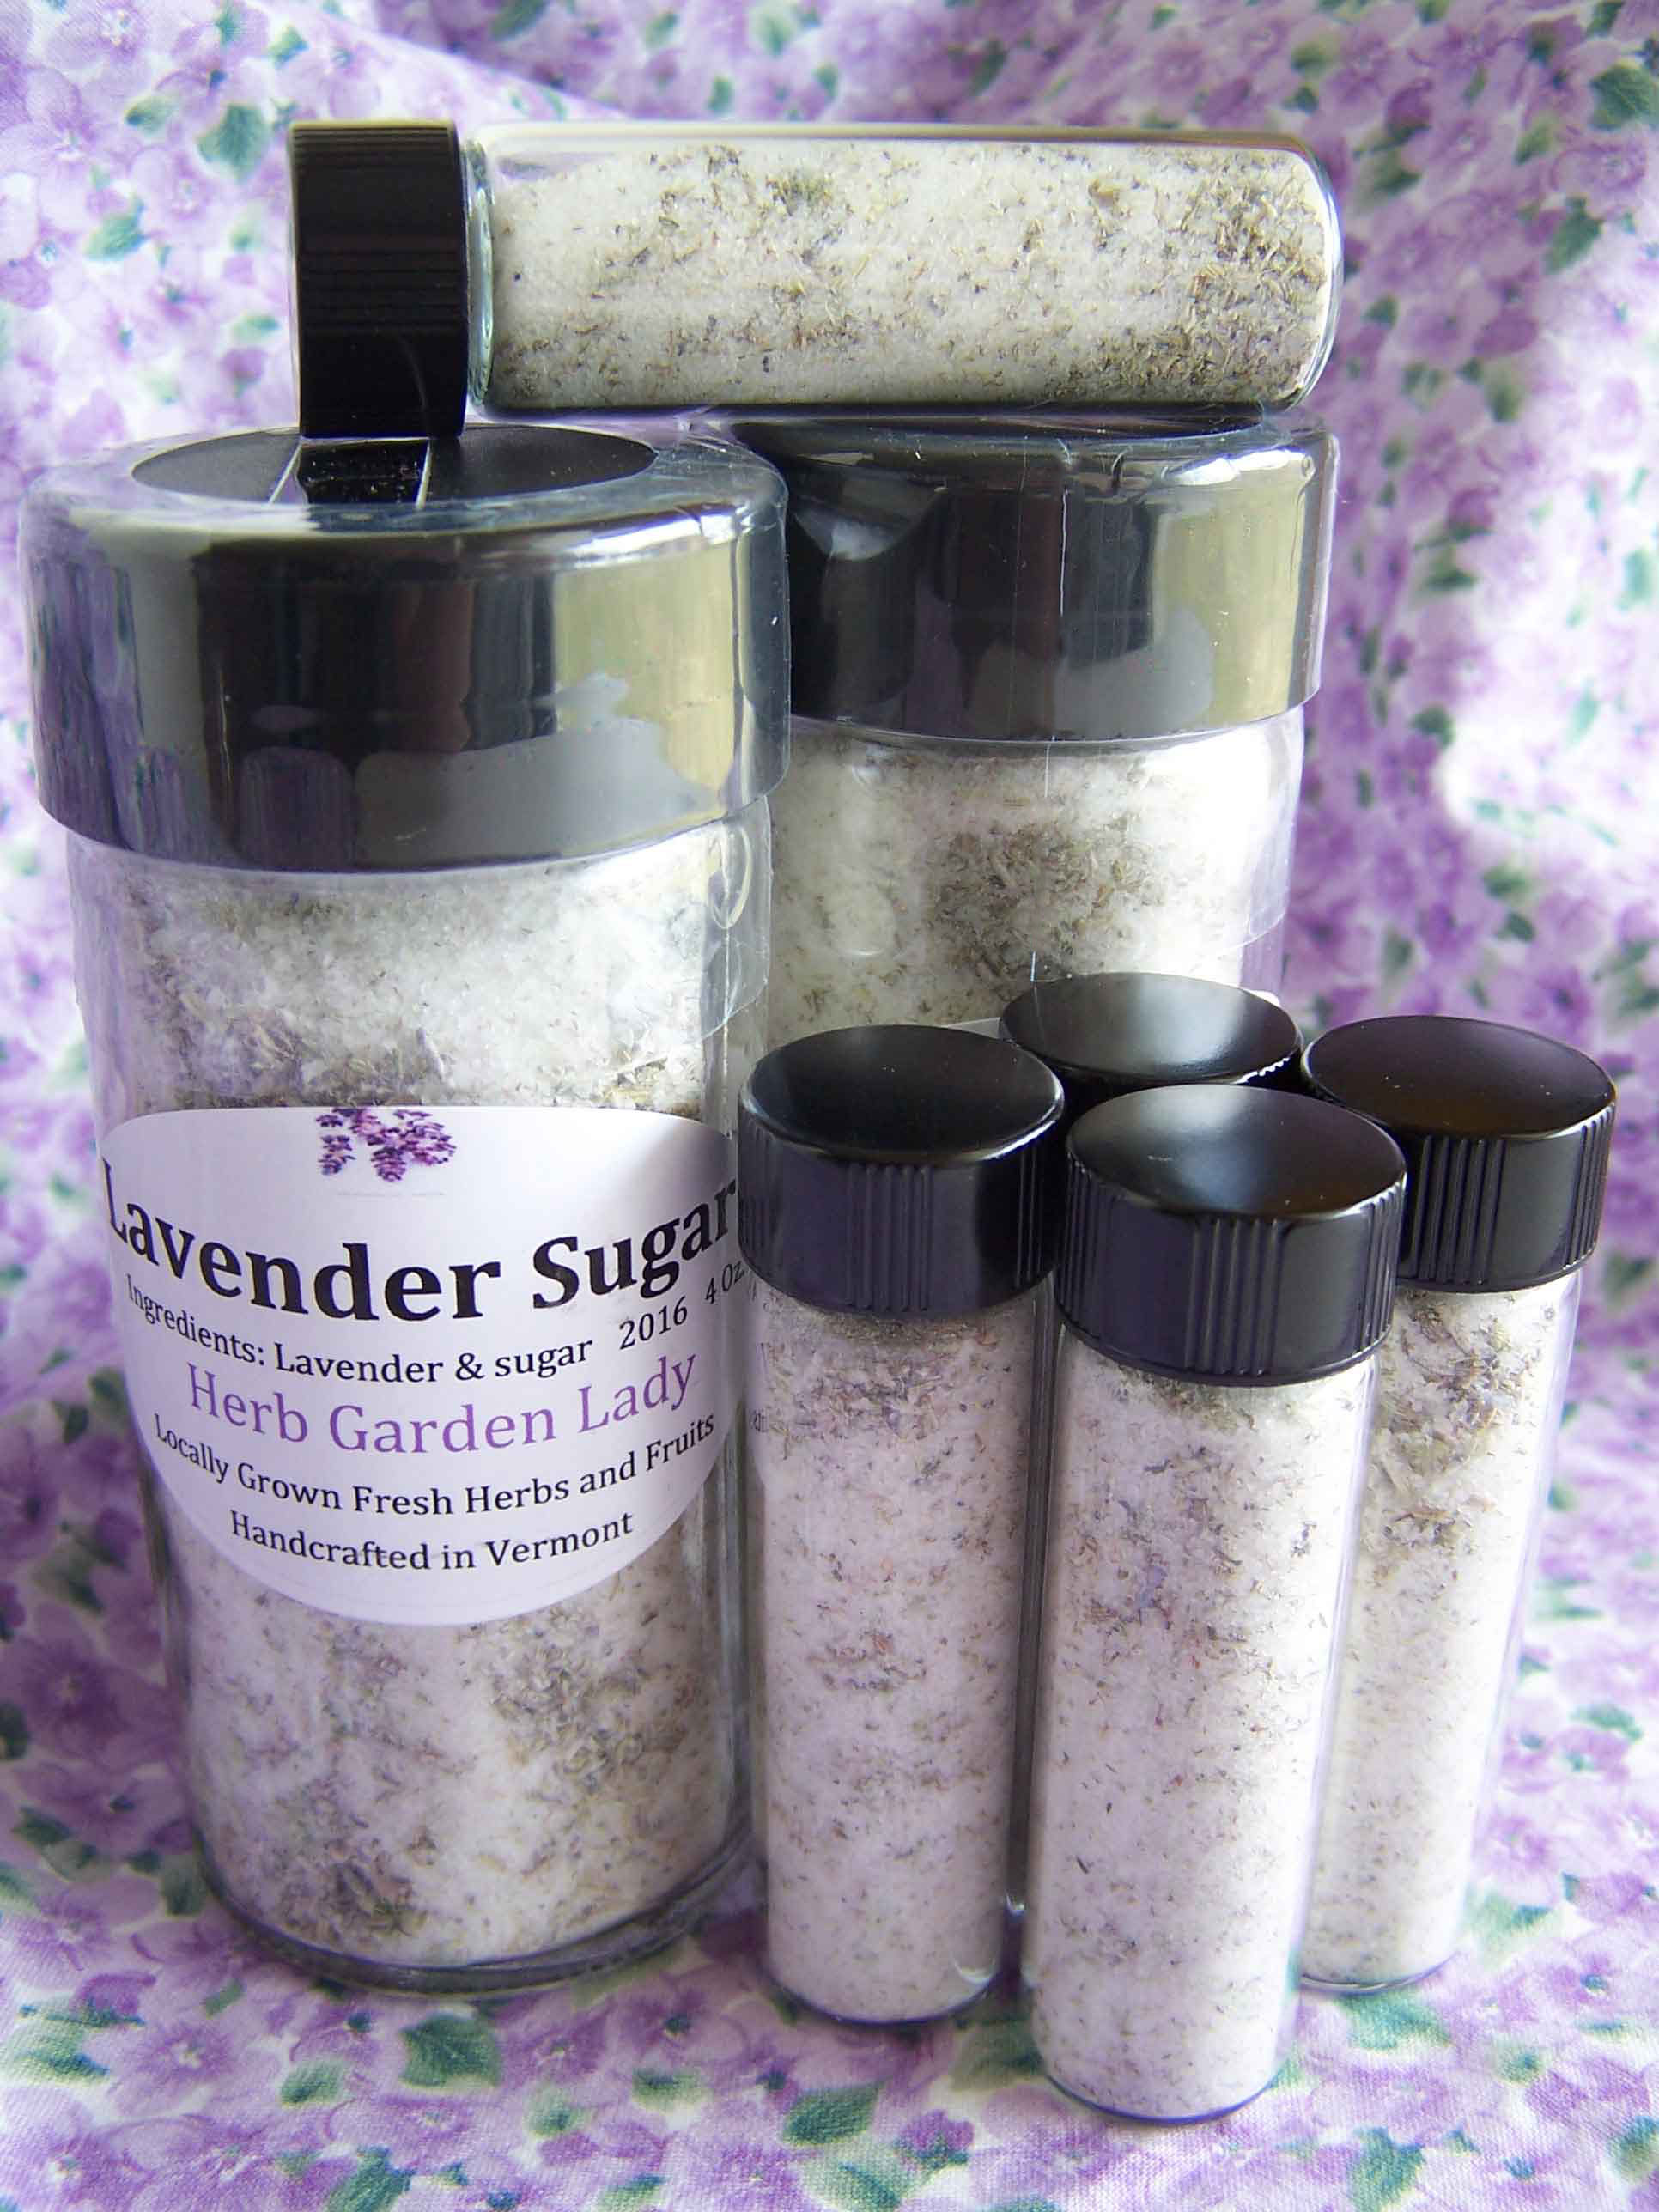 Lavender herb sugar is a way to sweeten the herb bread while getting the medicinal properties too.